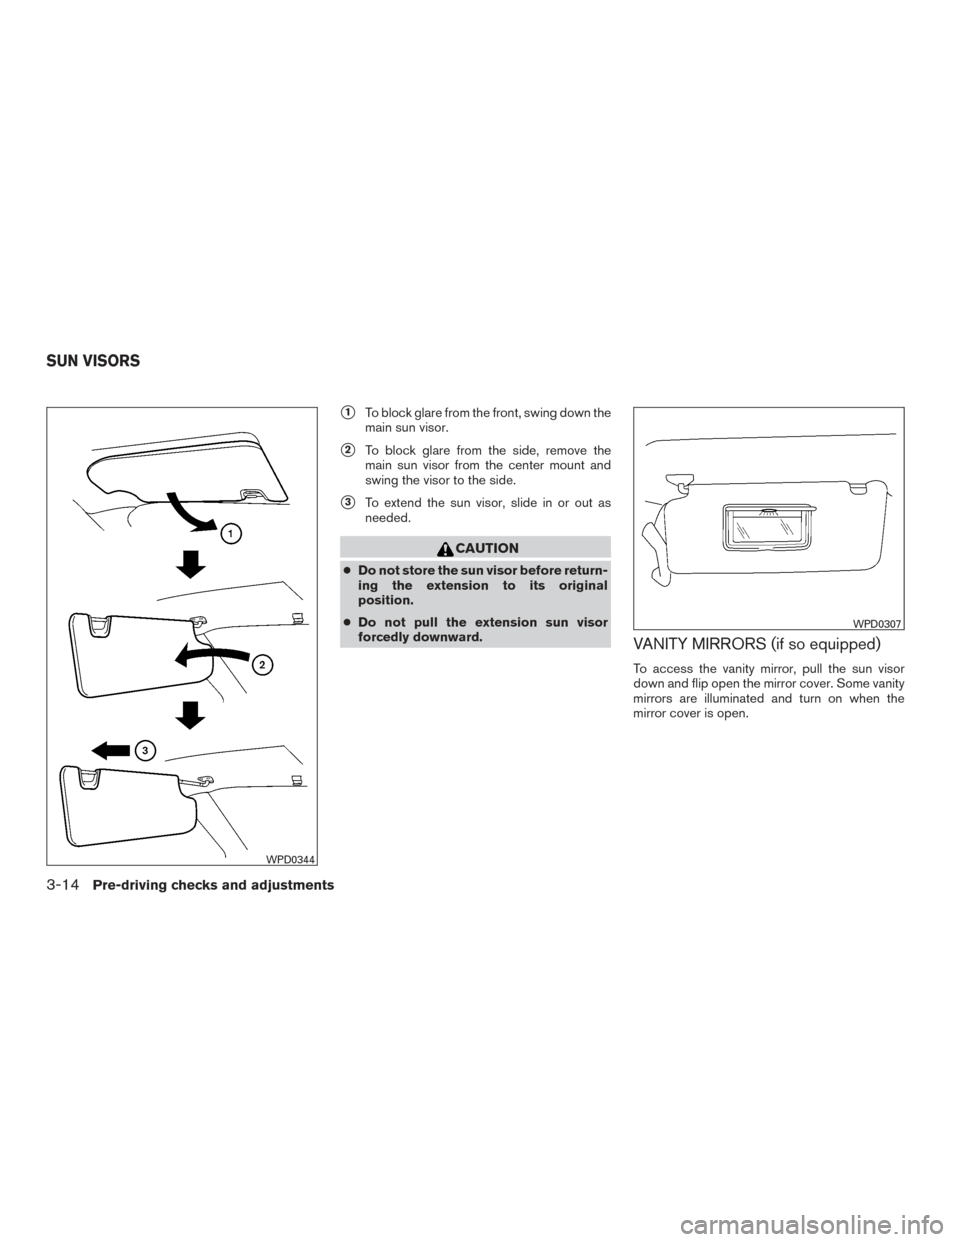 NISSAN FRONTIER 2015 D23 / 3.G Owners Manual 1To block glare from the front, swing down the
main sun visor.
2To block glare from the side, remove the
main sun visor from the center mount and
swing the visor to the side.
3To extend the sun vis